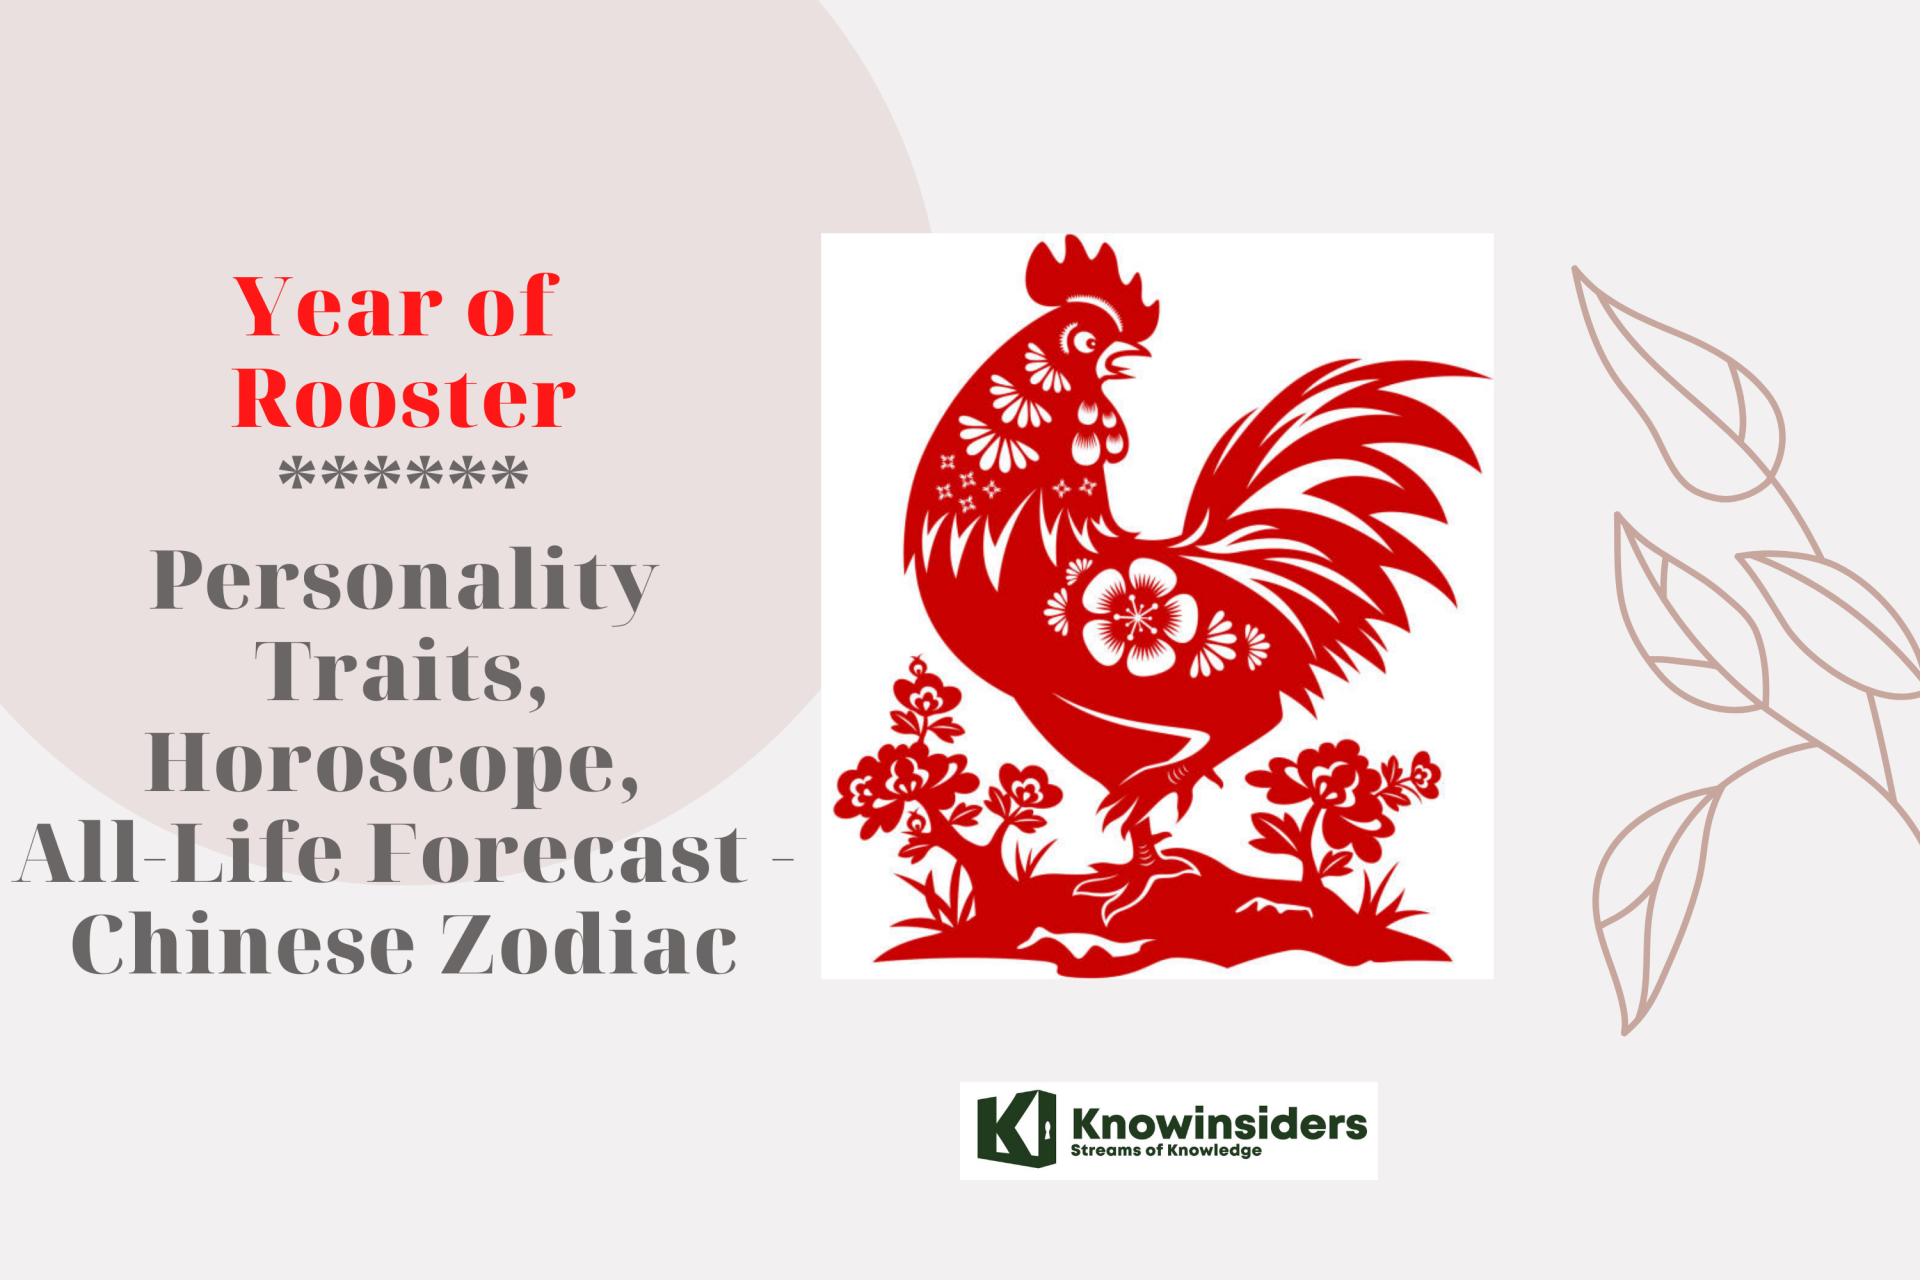 Year of Rooster: Personality Traits, Horoscope, Forecast - Chinese Zodiac